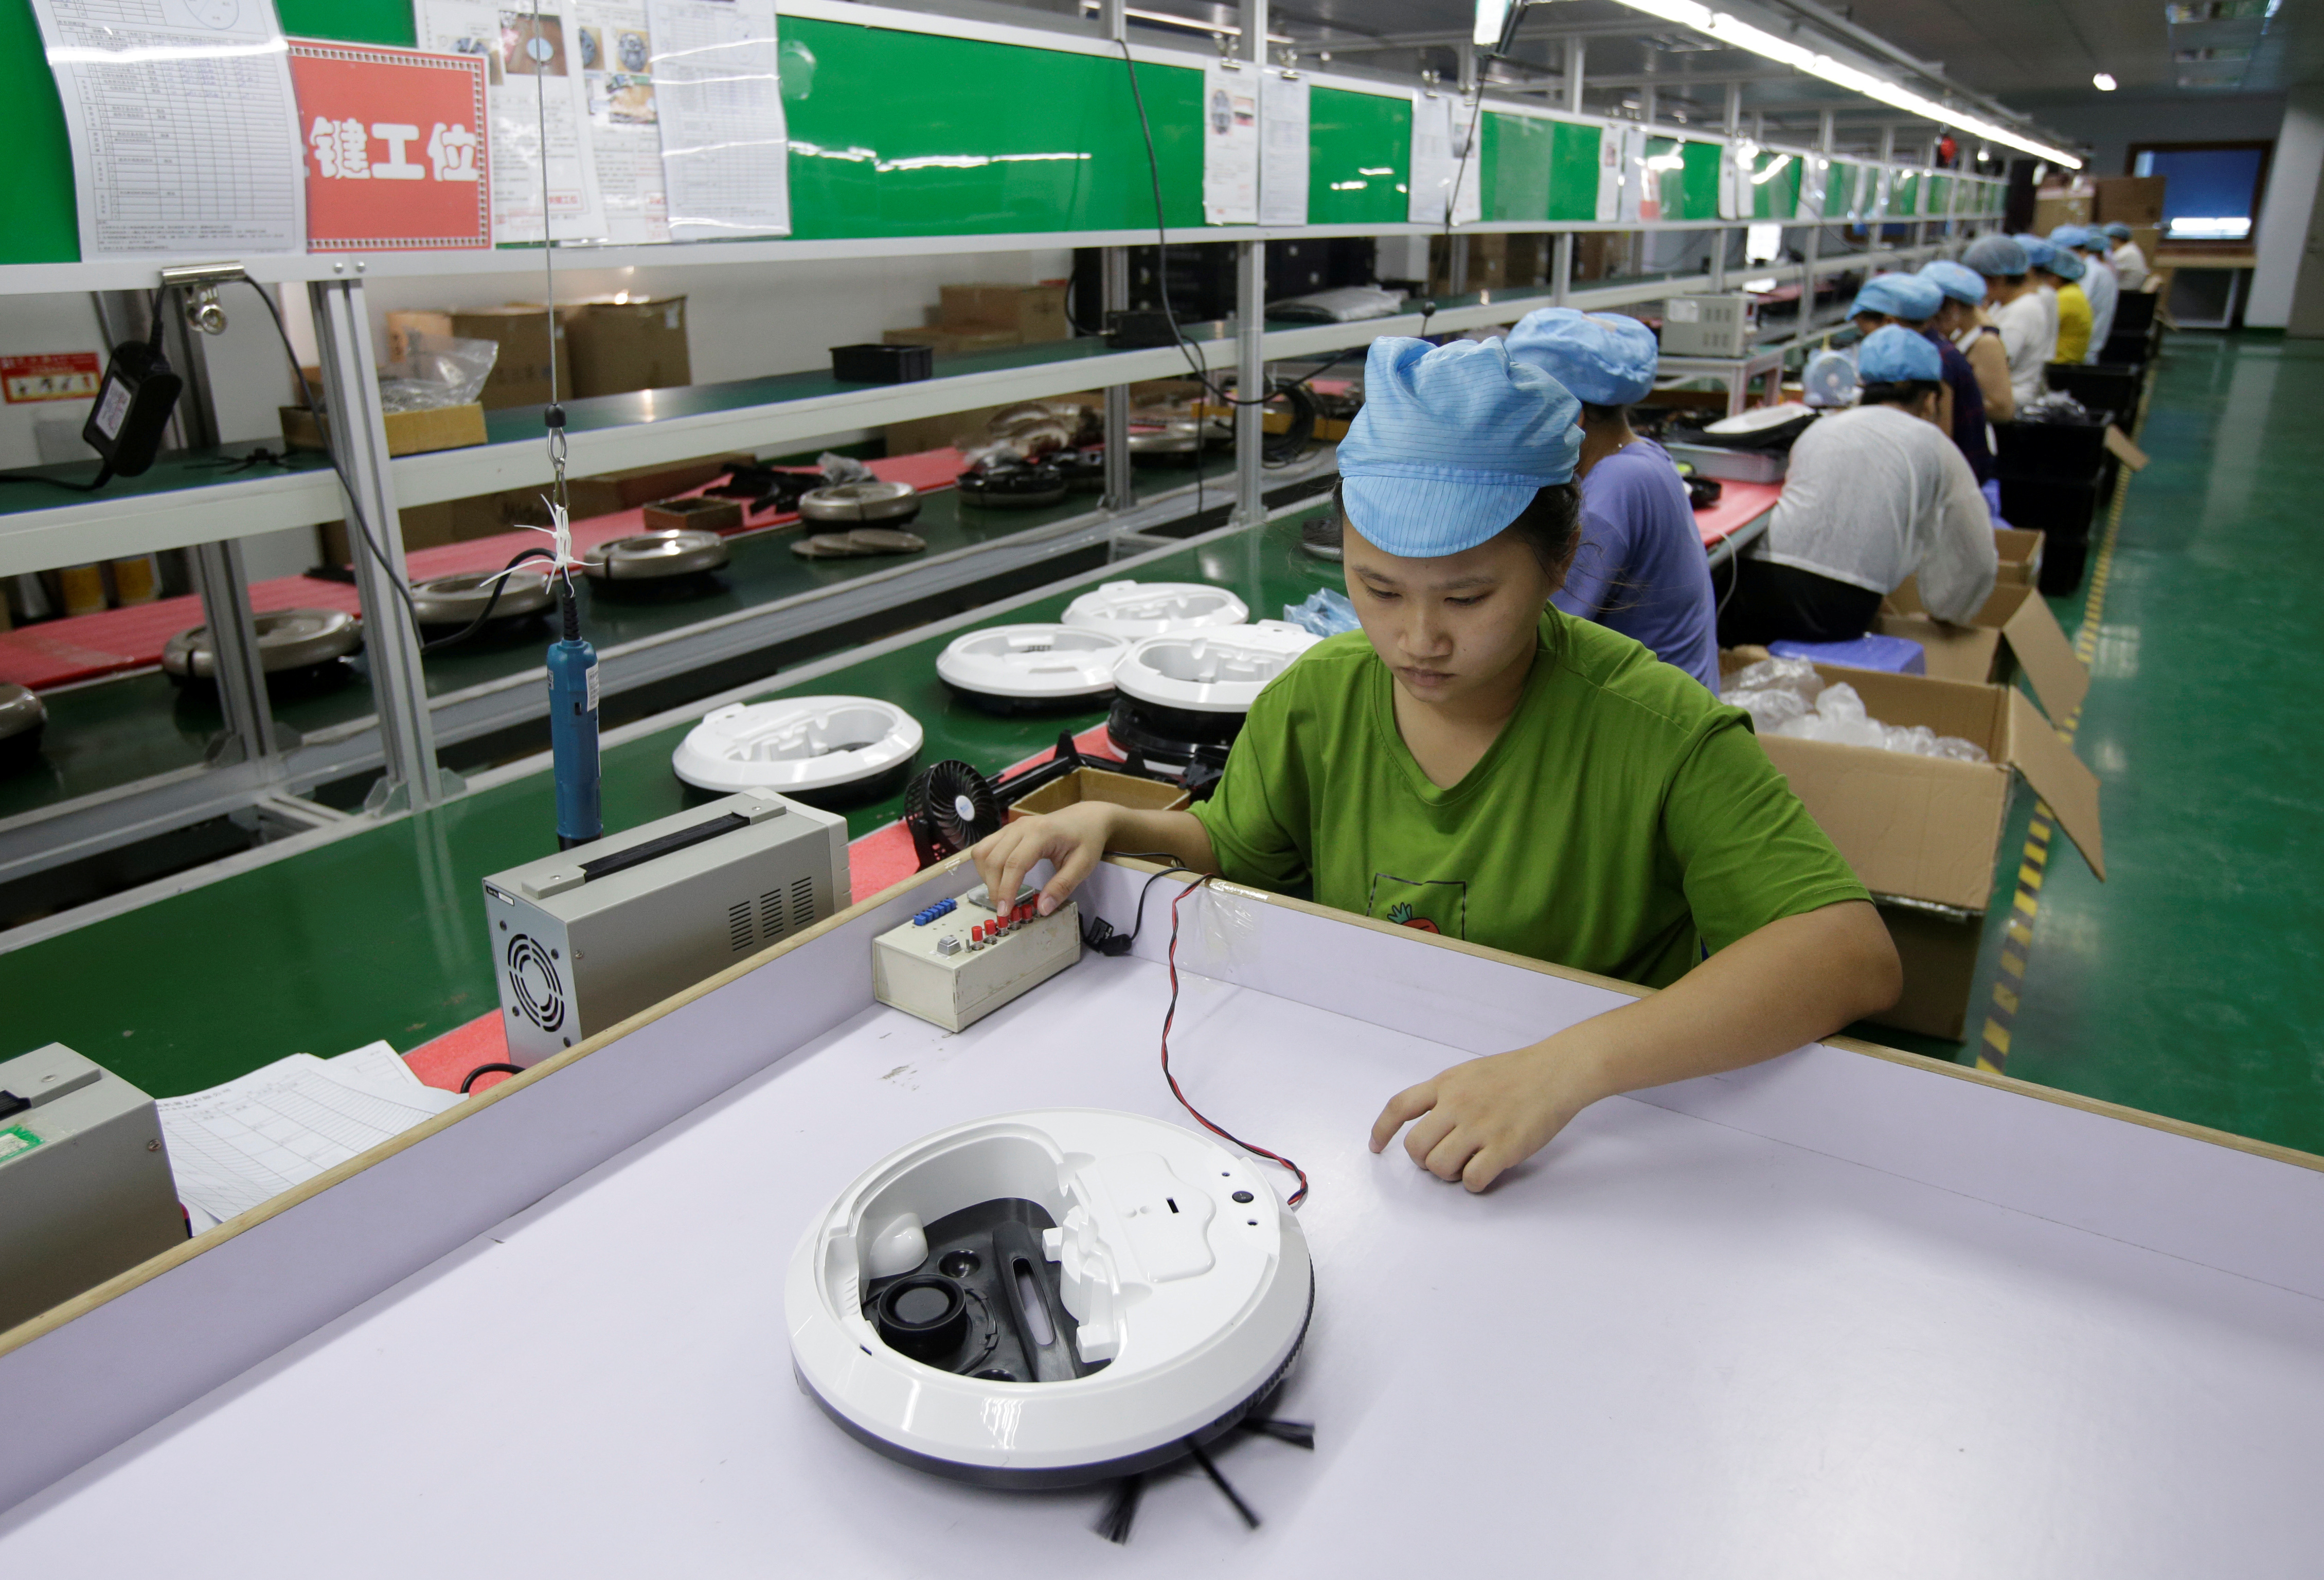 An employee works on the production line of a robot vacuum cleaner at a factory of Matsutek in Shenzhen